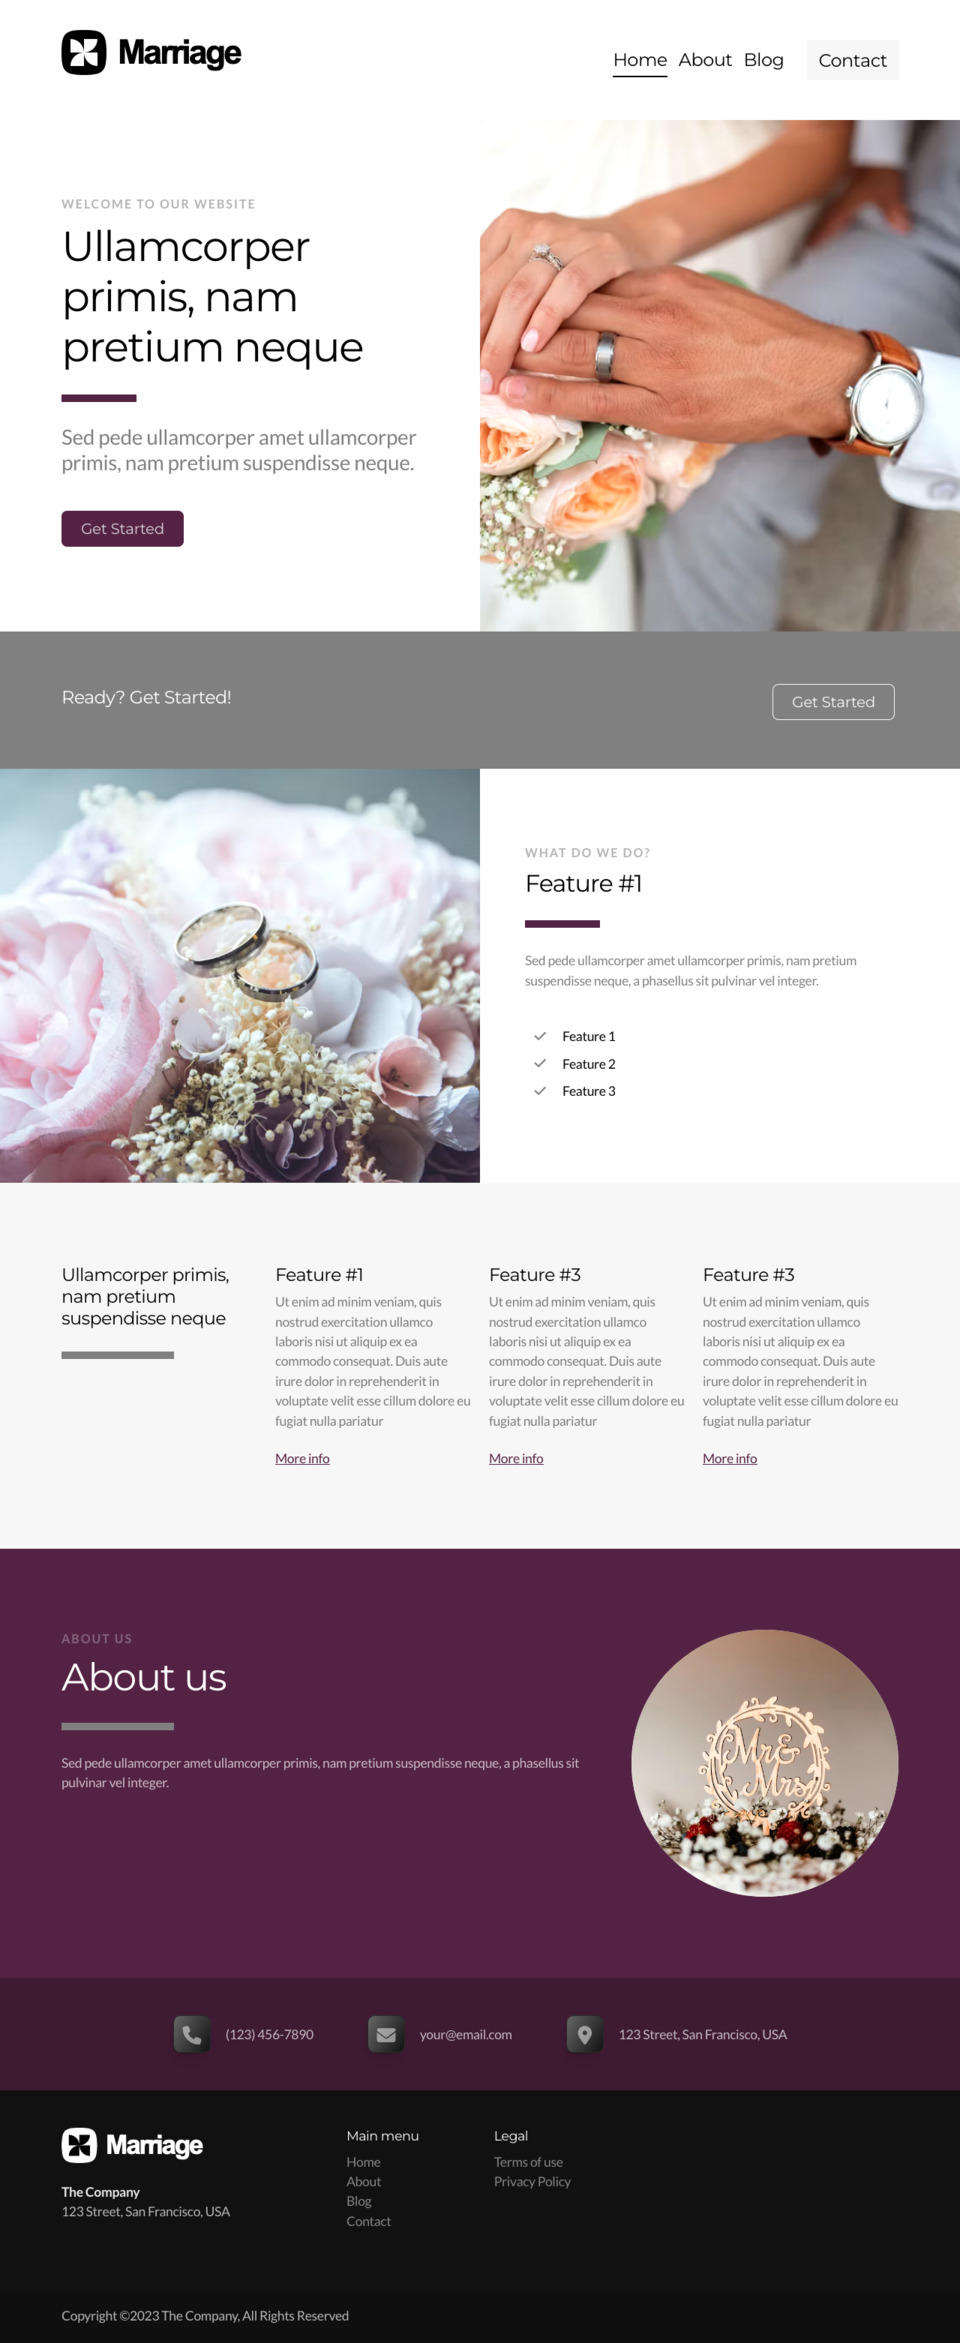 Marriage Website Template - Ideal for wedding planners, marriage counselors, relationship bloggers, love coaches, honeymoon planners, and anyone looking to create a website about love and relationships.